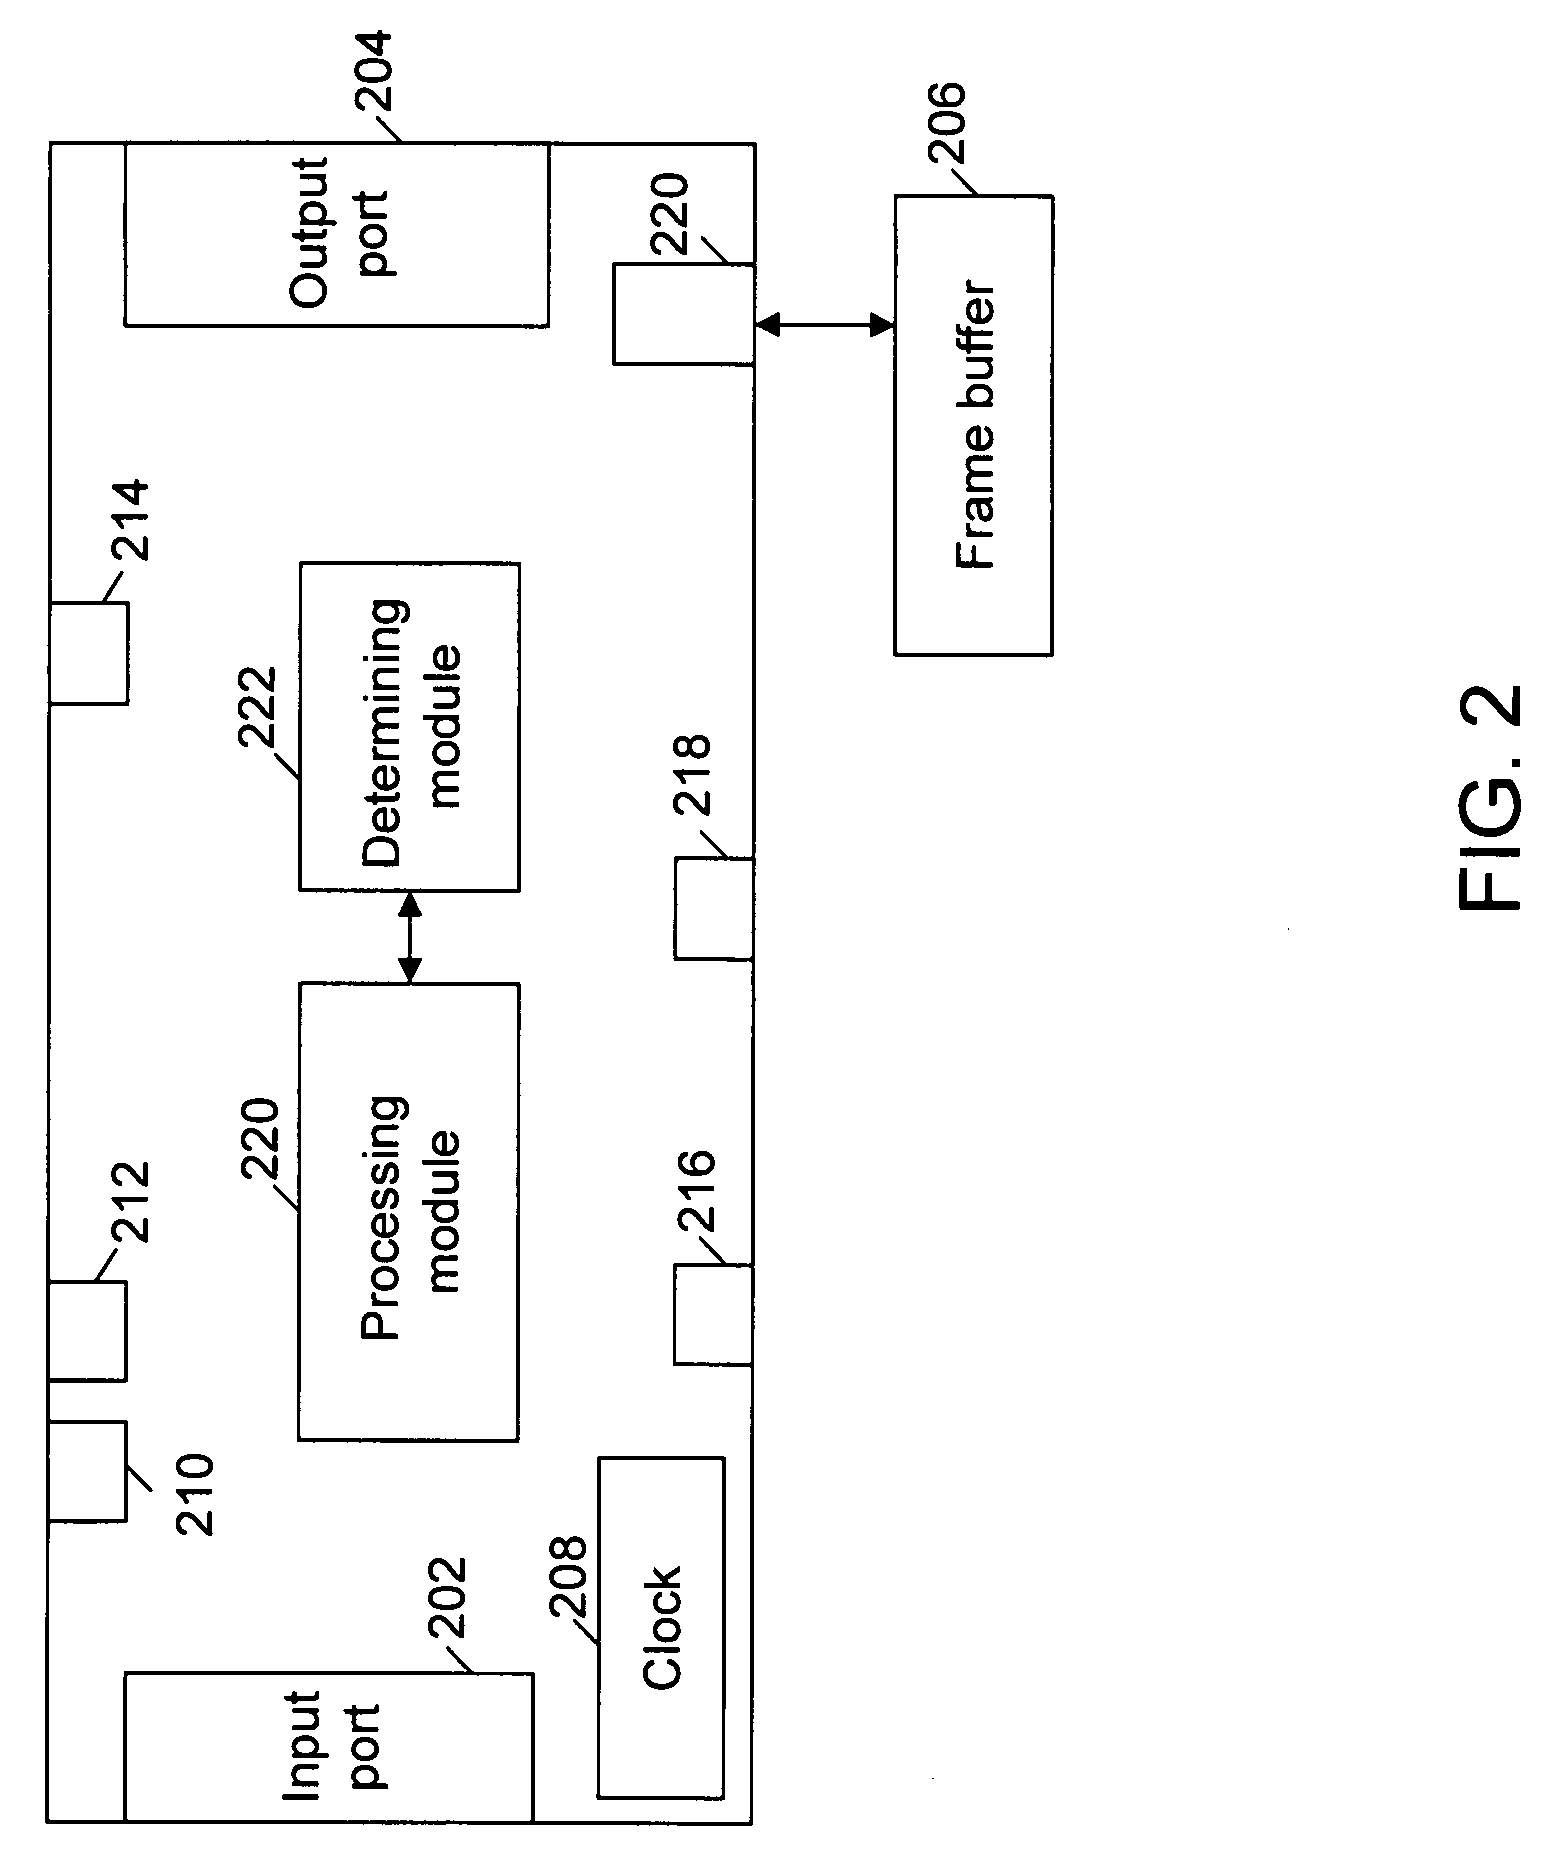 Self-refreshing display controller for a display device in a computational unit